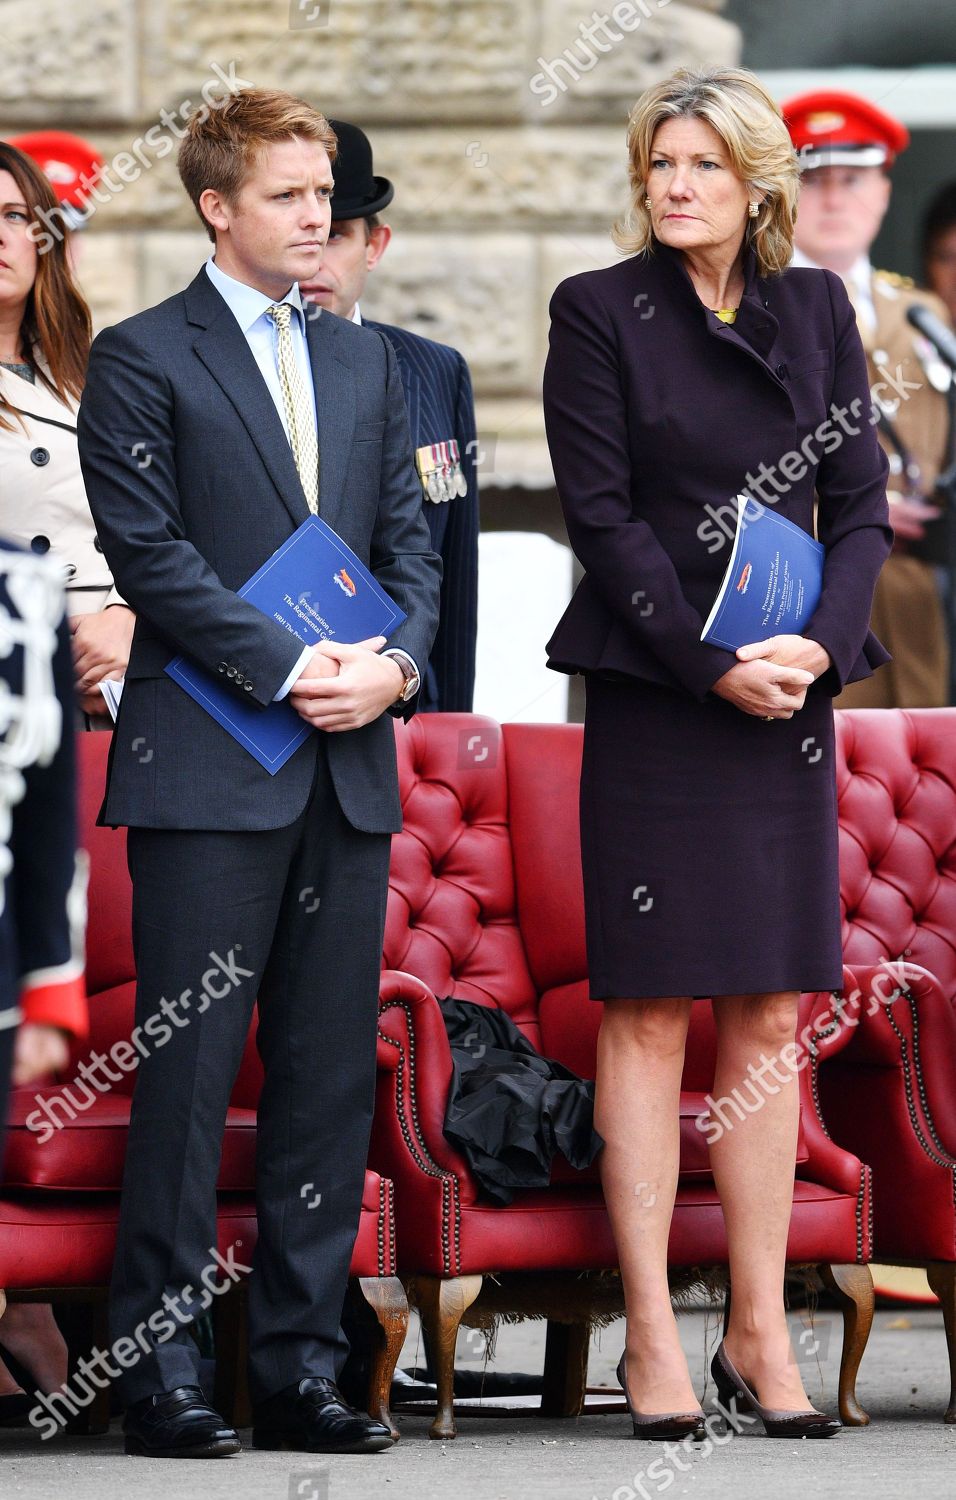 https://editorial01.shutterstock.com/wm-preview-1500/9889284i/24a8e4a7/queens-own-yeomanry-consecration-service-bramham-park-yorkshire-uk-shutterstock-editorial-9889284i.jpg